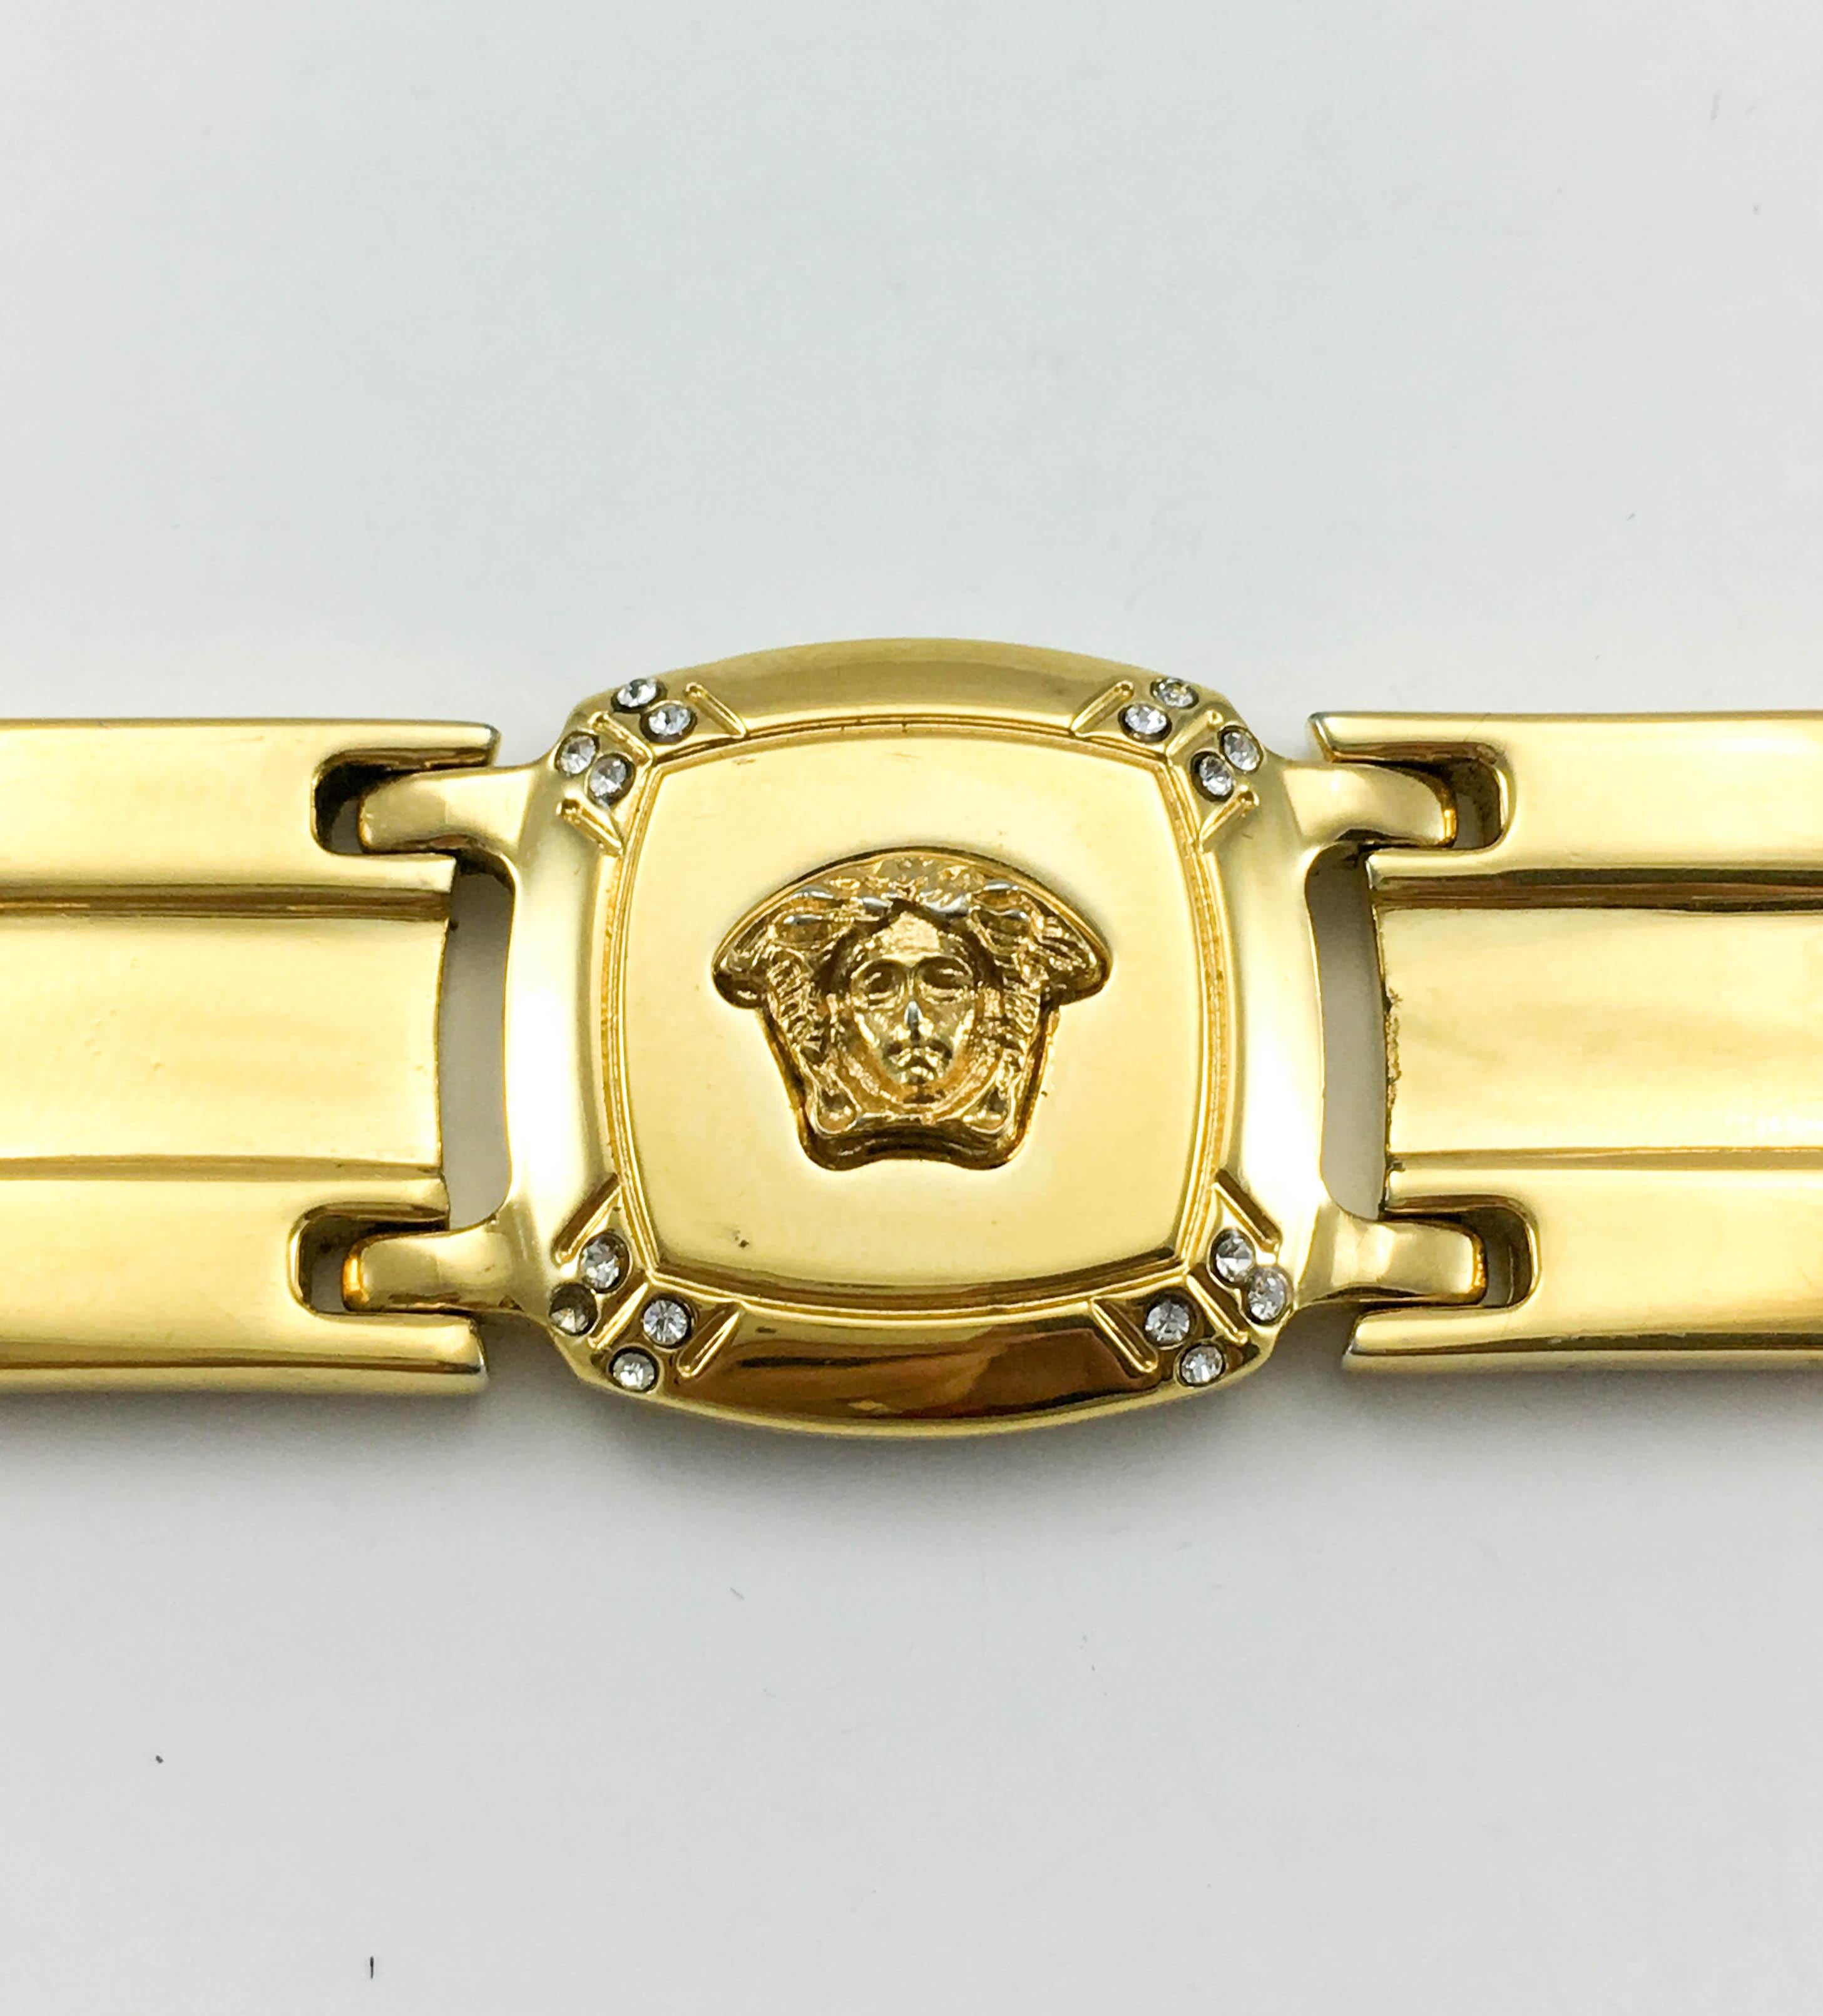 1990's Gianni Versace Gold-Plated Medusa Head Bracelet In Excellent Condition For Sale In London, Chelsea